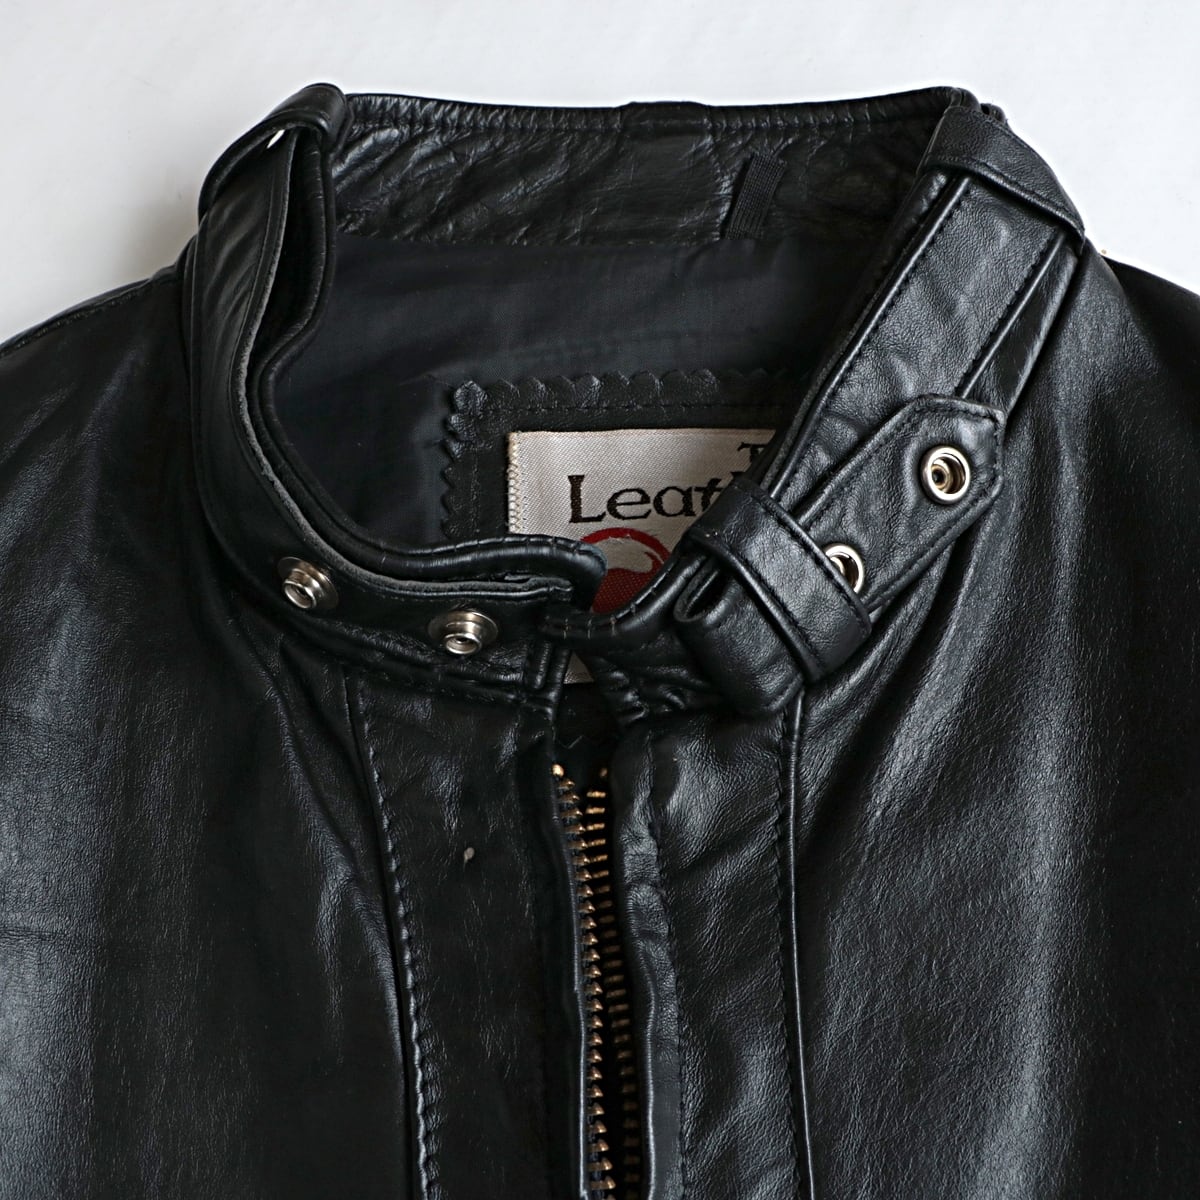 70s vintage sears ”the leather shop” シングル レザー ライダース